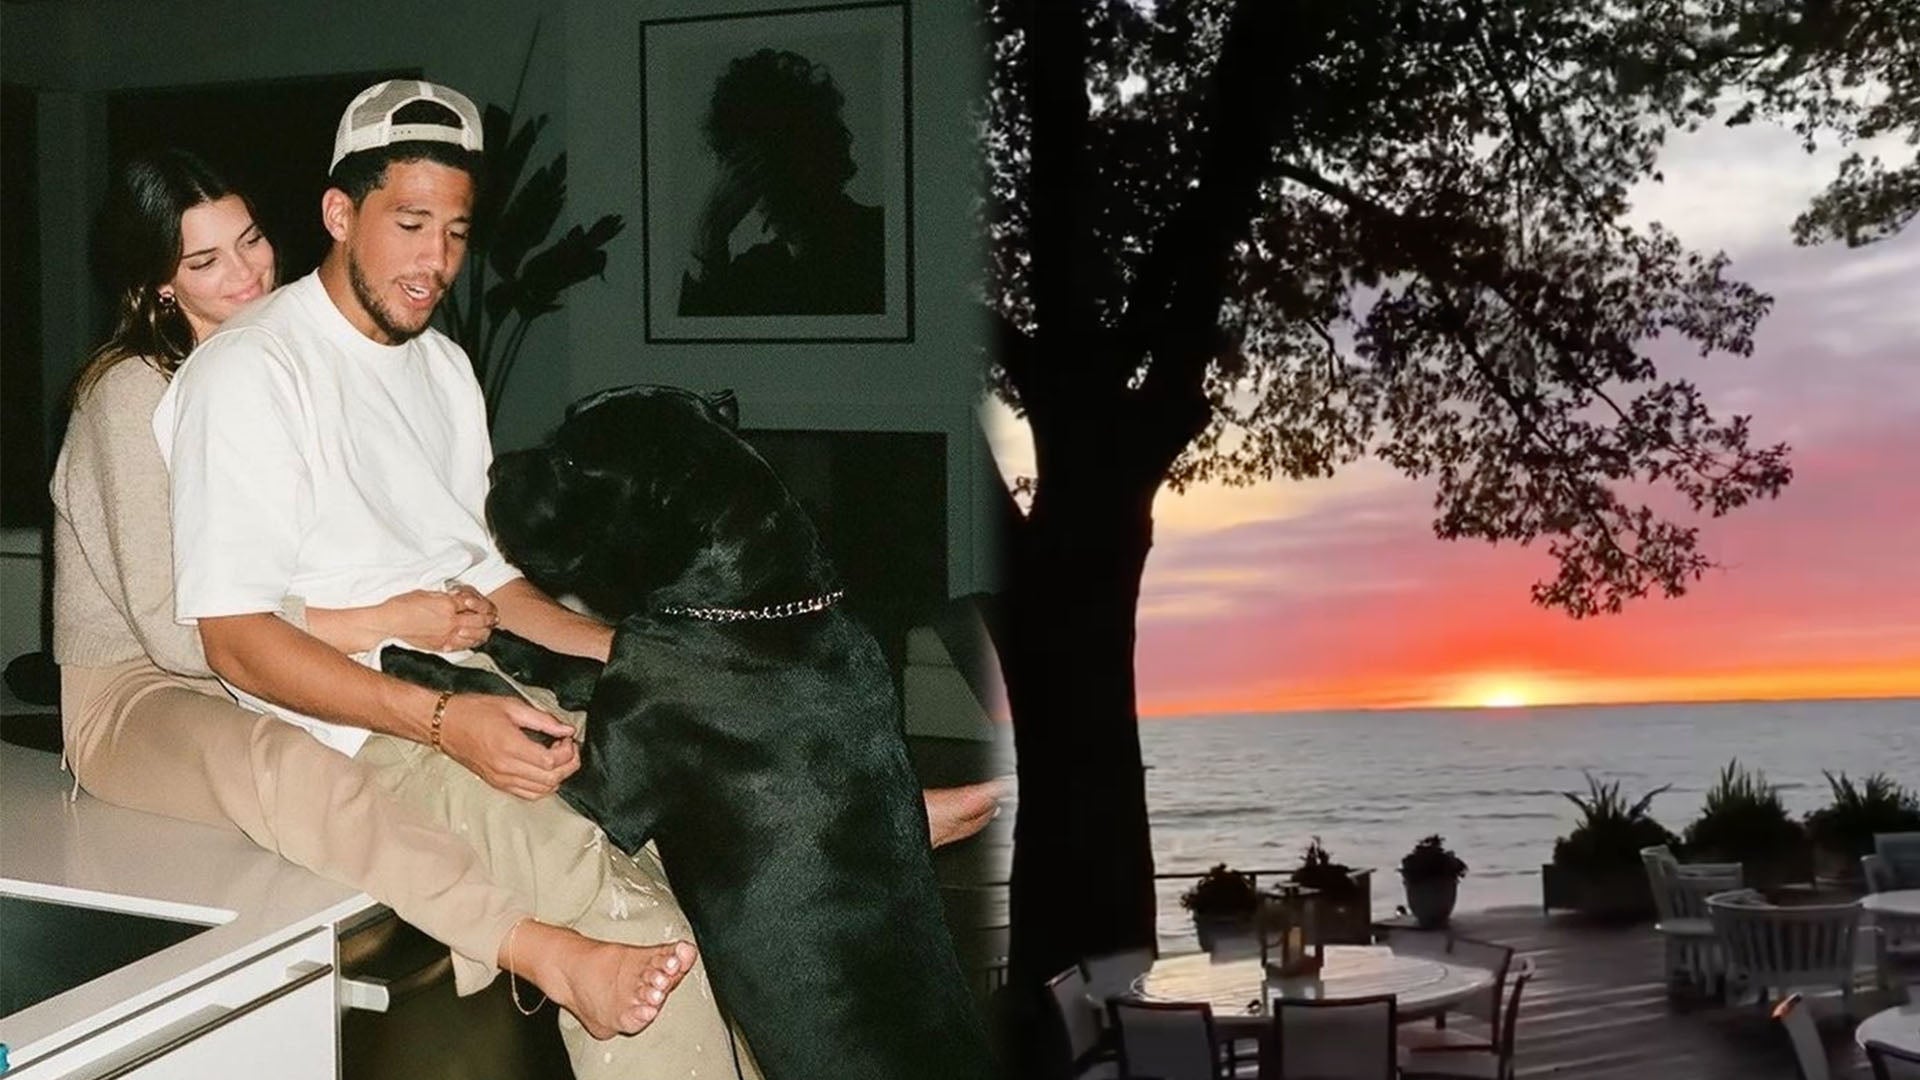 Kendall Jenner Posts Boyfriend Devin Booker's Dog in His Jersey